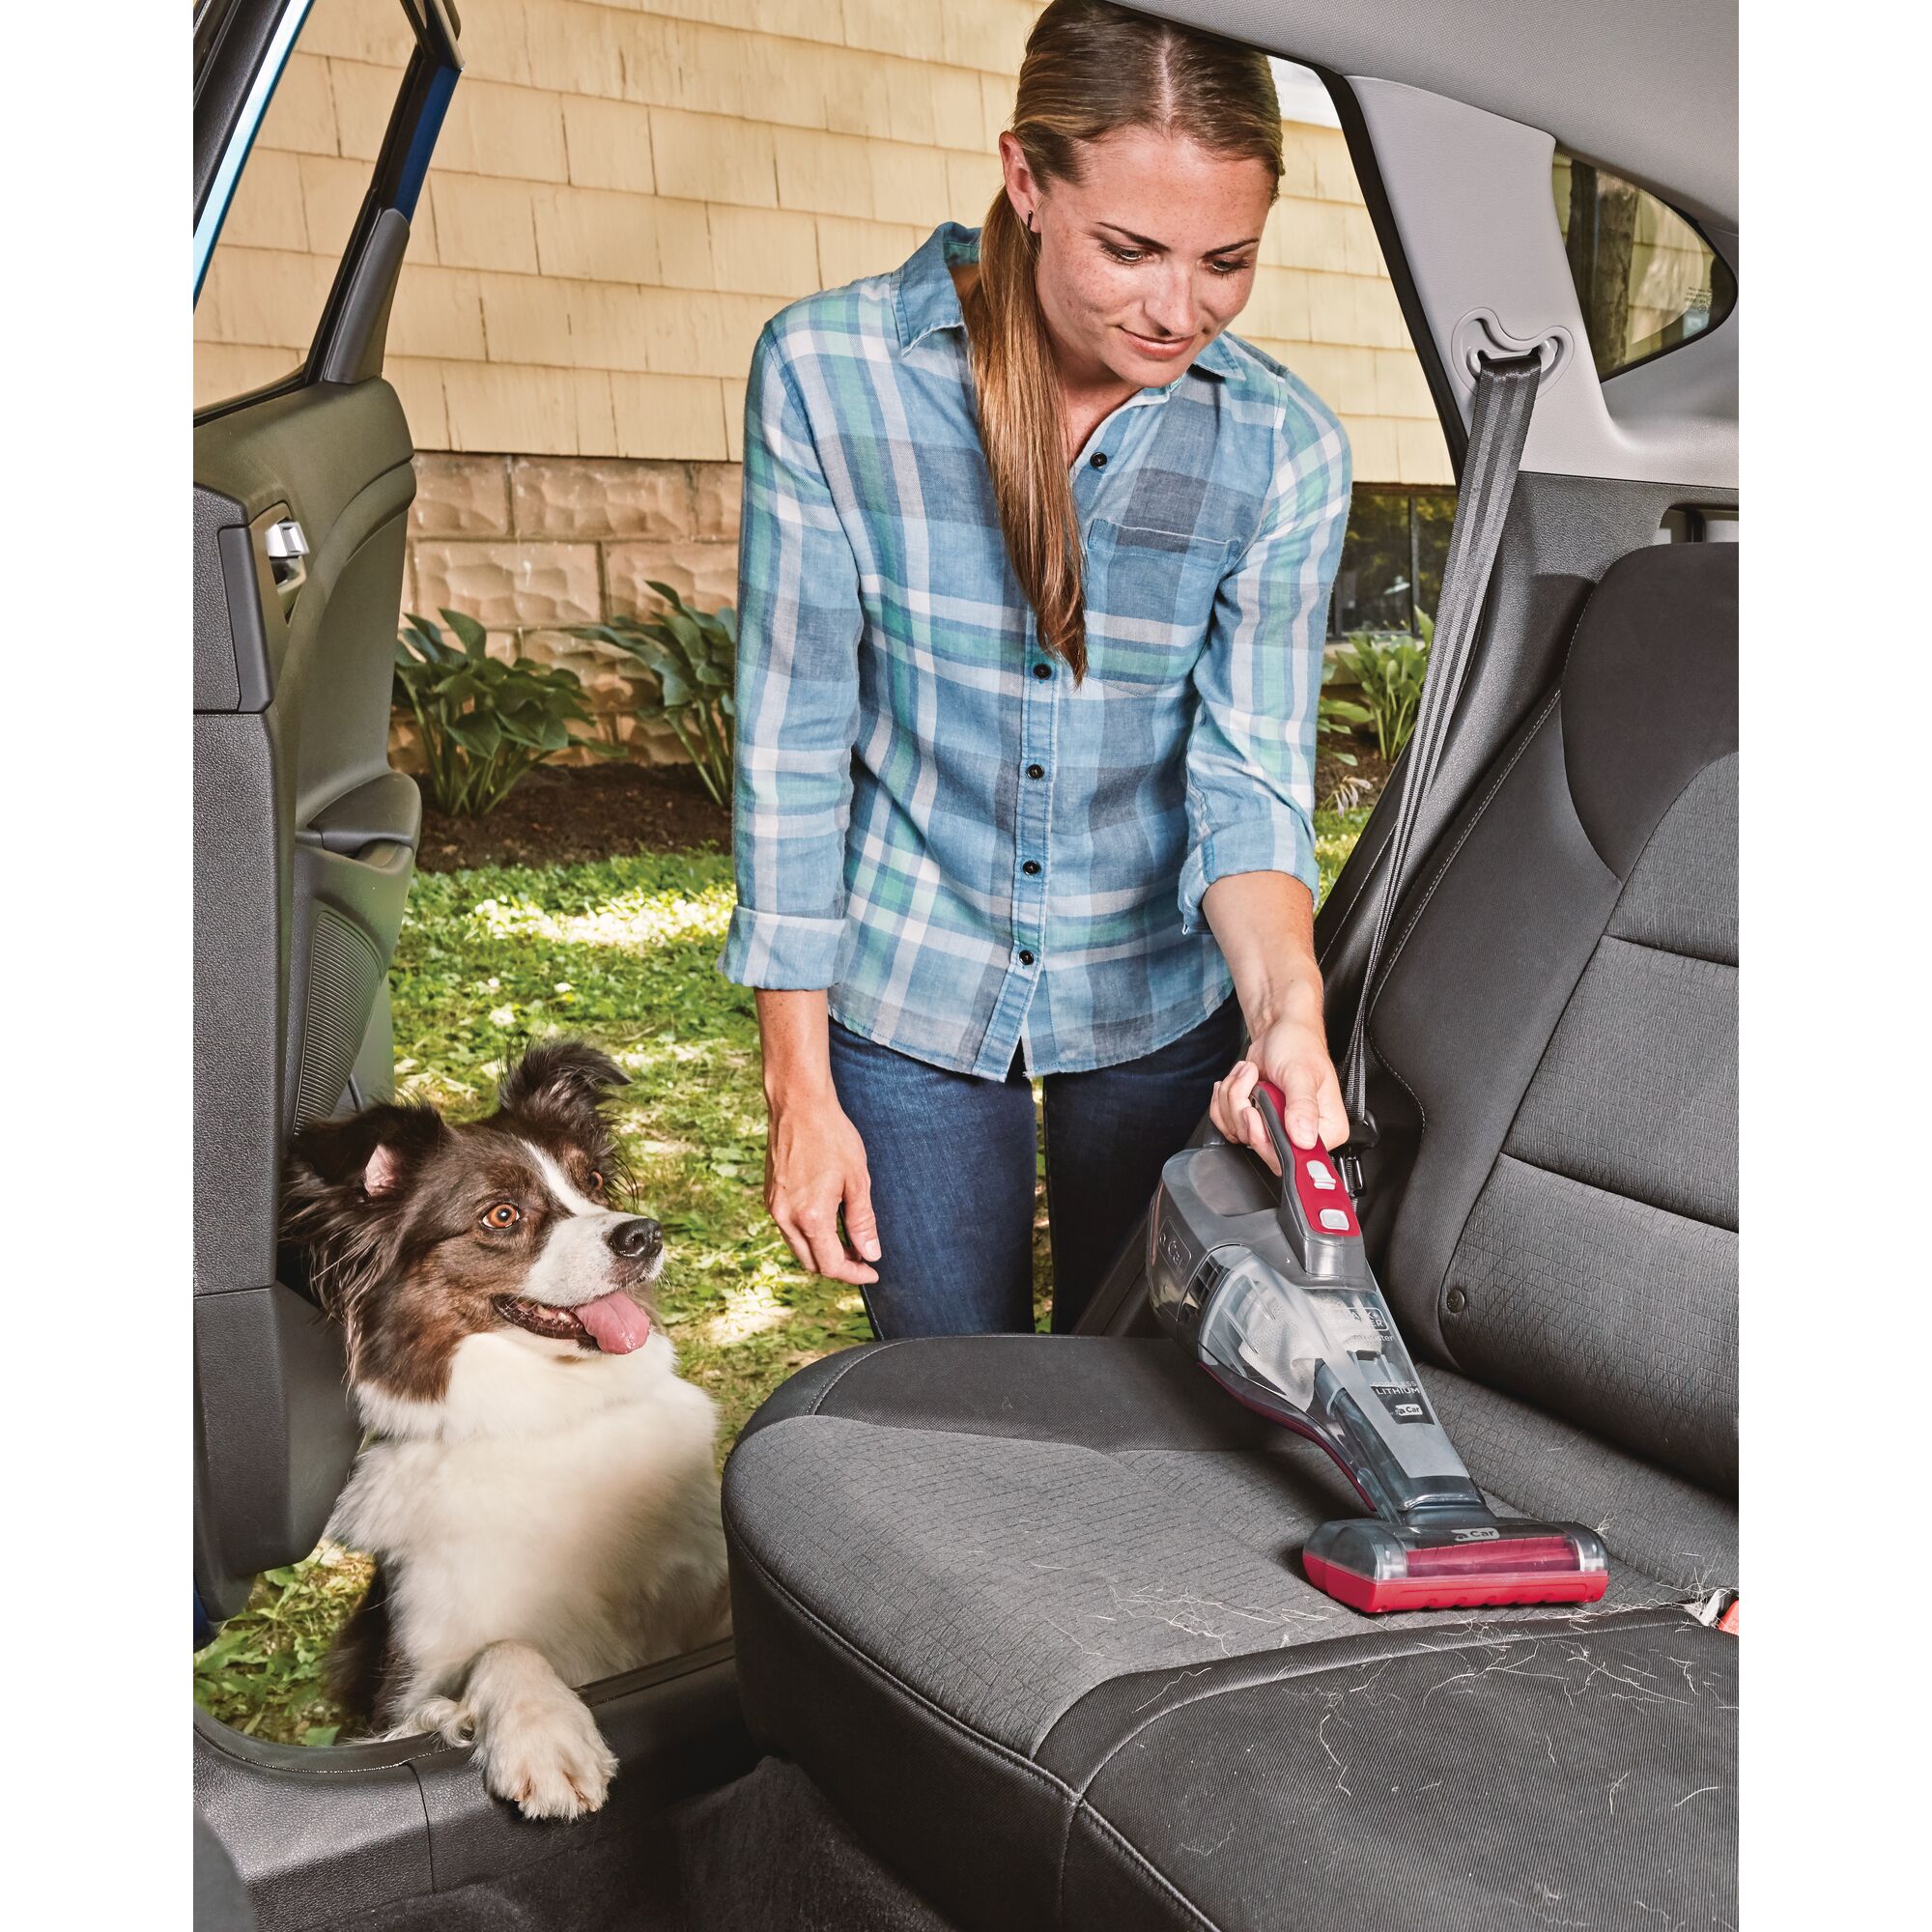 dustbuster QuickClean car cordless hand vacuum with motorized upholstery brush being used by a person to clean back seat of car.